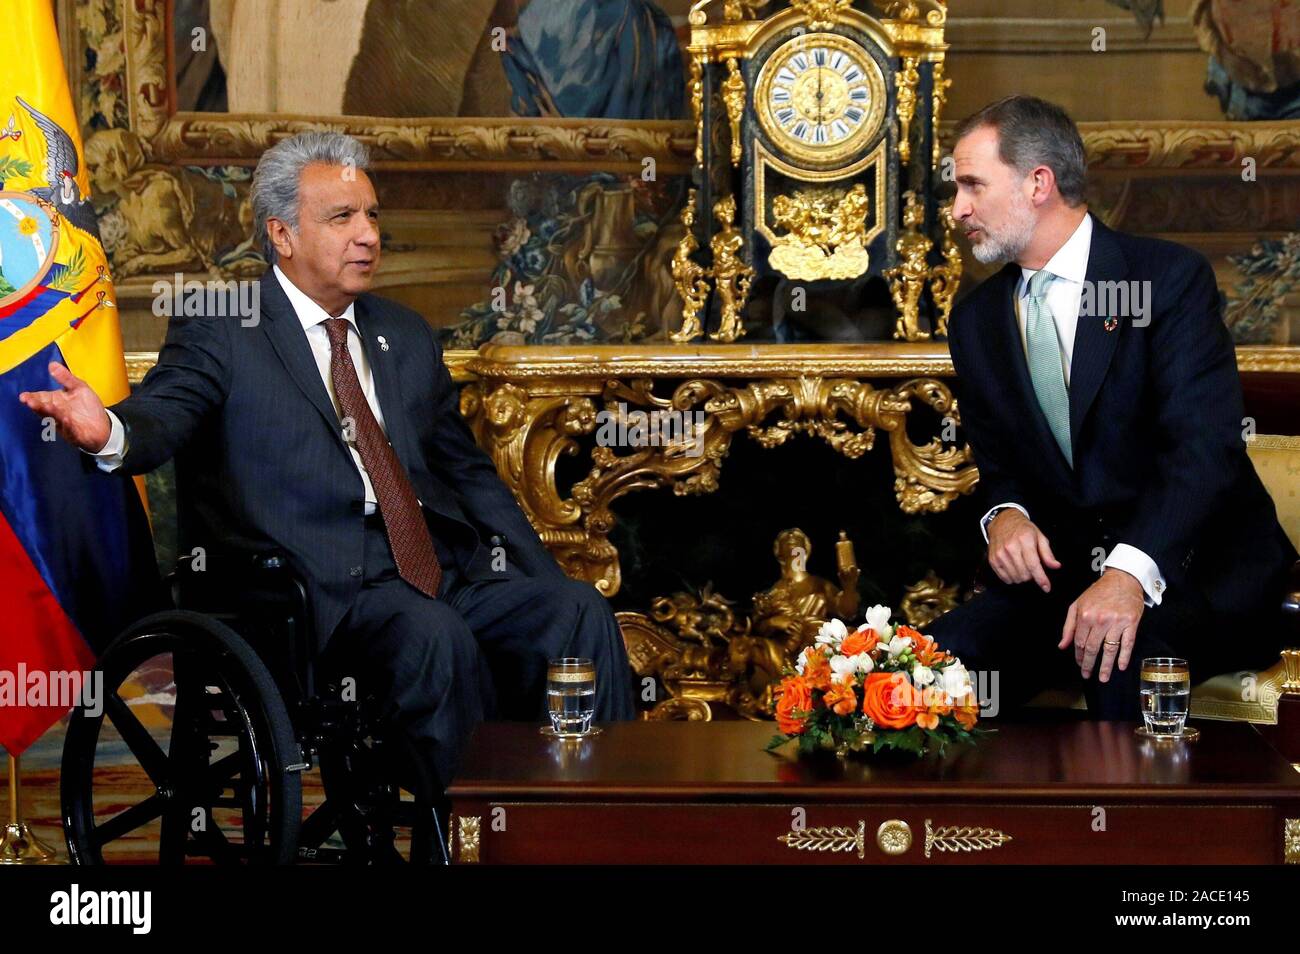 Madrid, Spain. 02nd Dec, 2019. Spanish King Felipe VI meeting with Ecuador President Lenin Moreno on his official visit to Spain at RoyalPalace in Madrid on Monday, 02 December 2019. Credit: CORDON PRESS/Alamy Live News Stock Photo